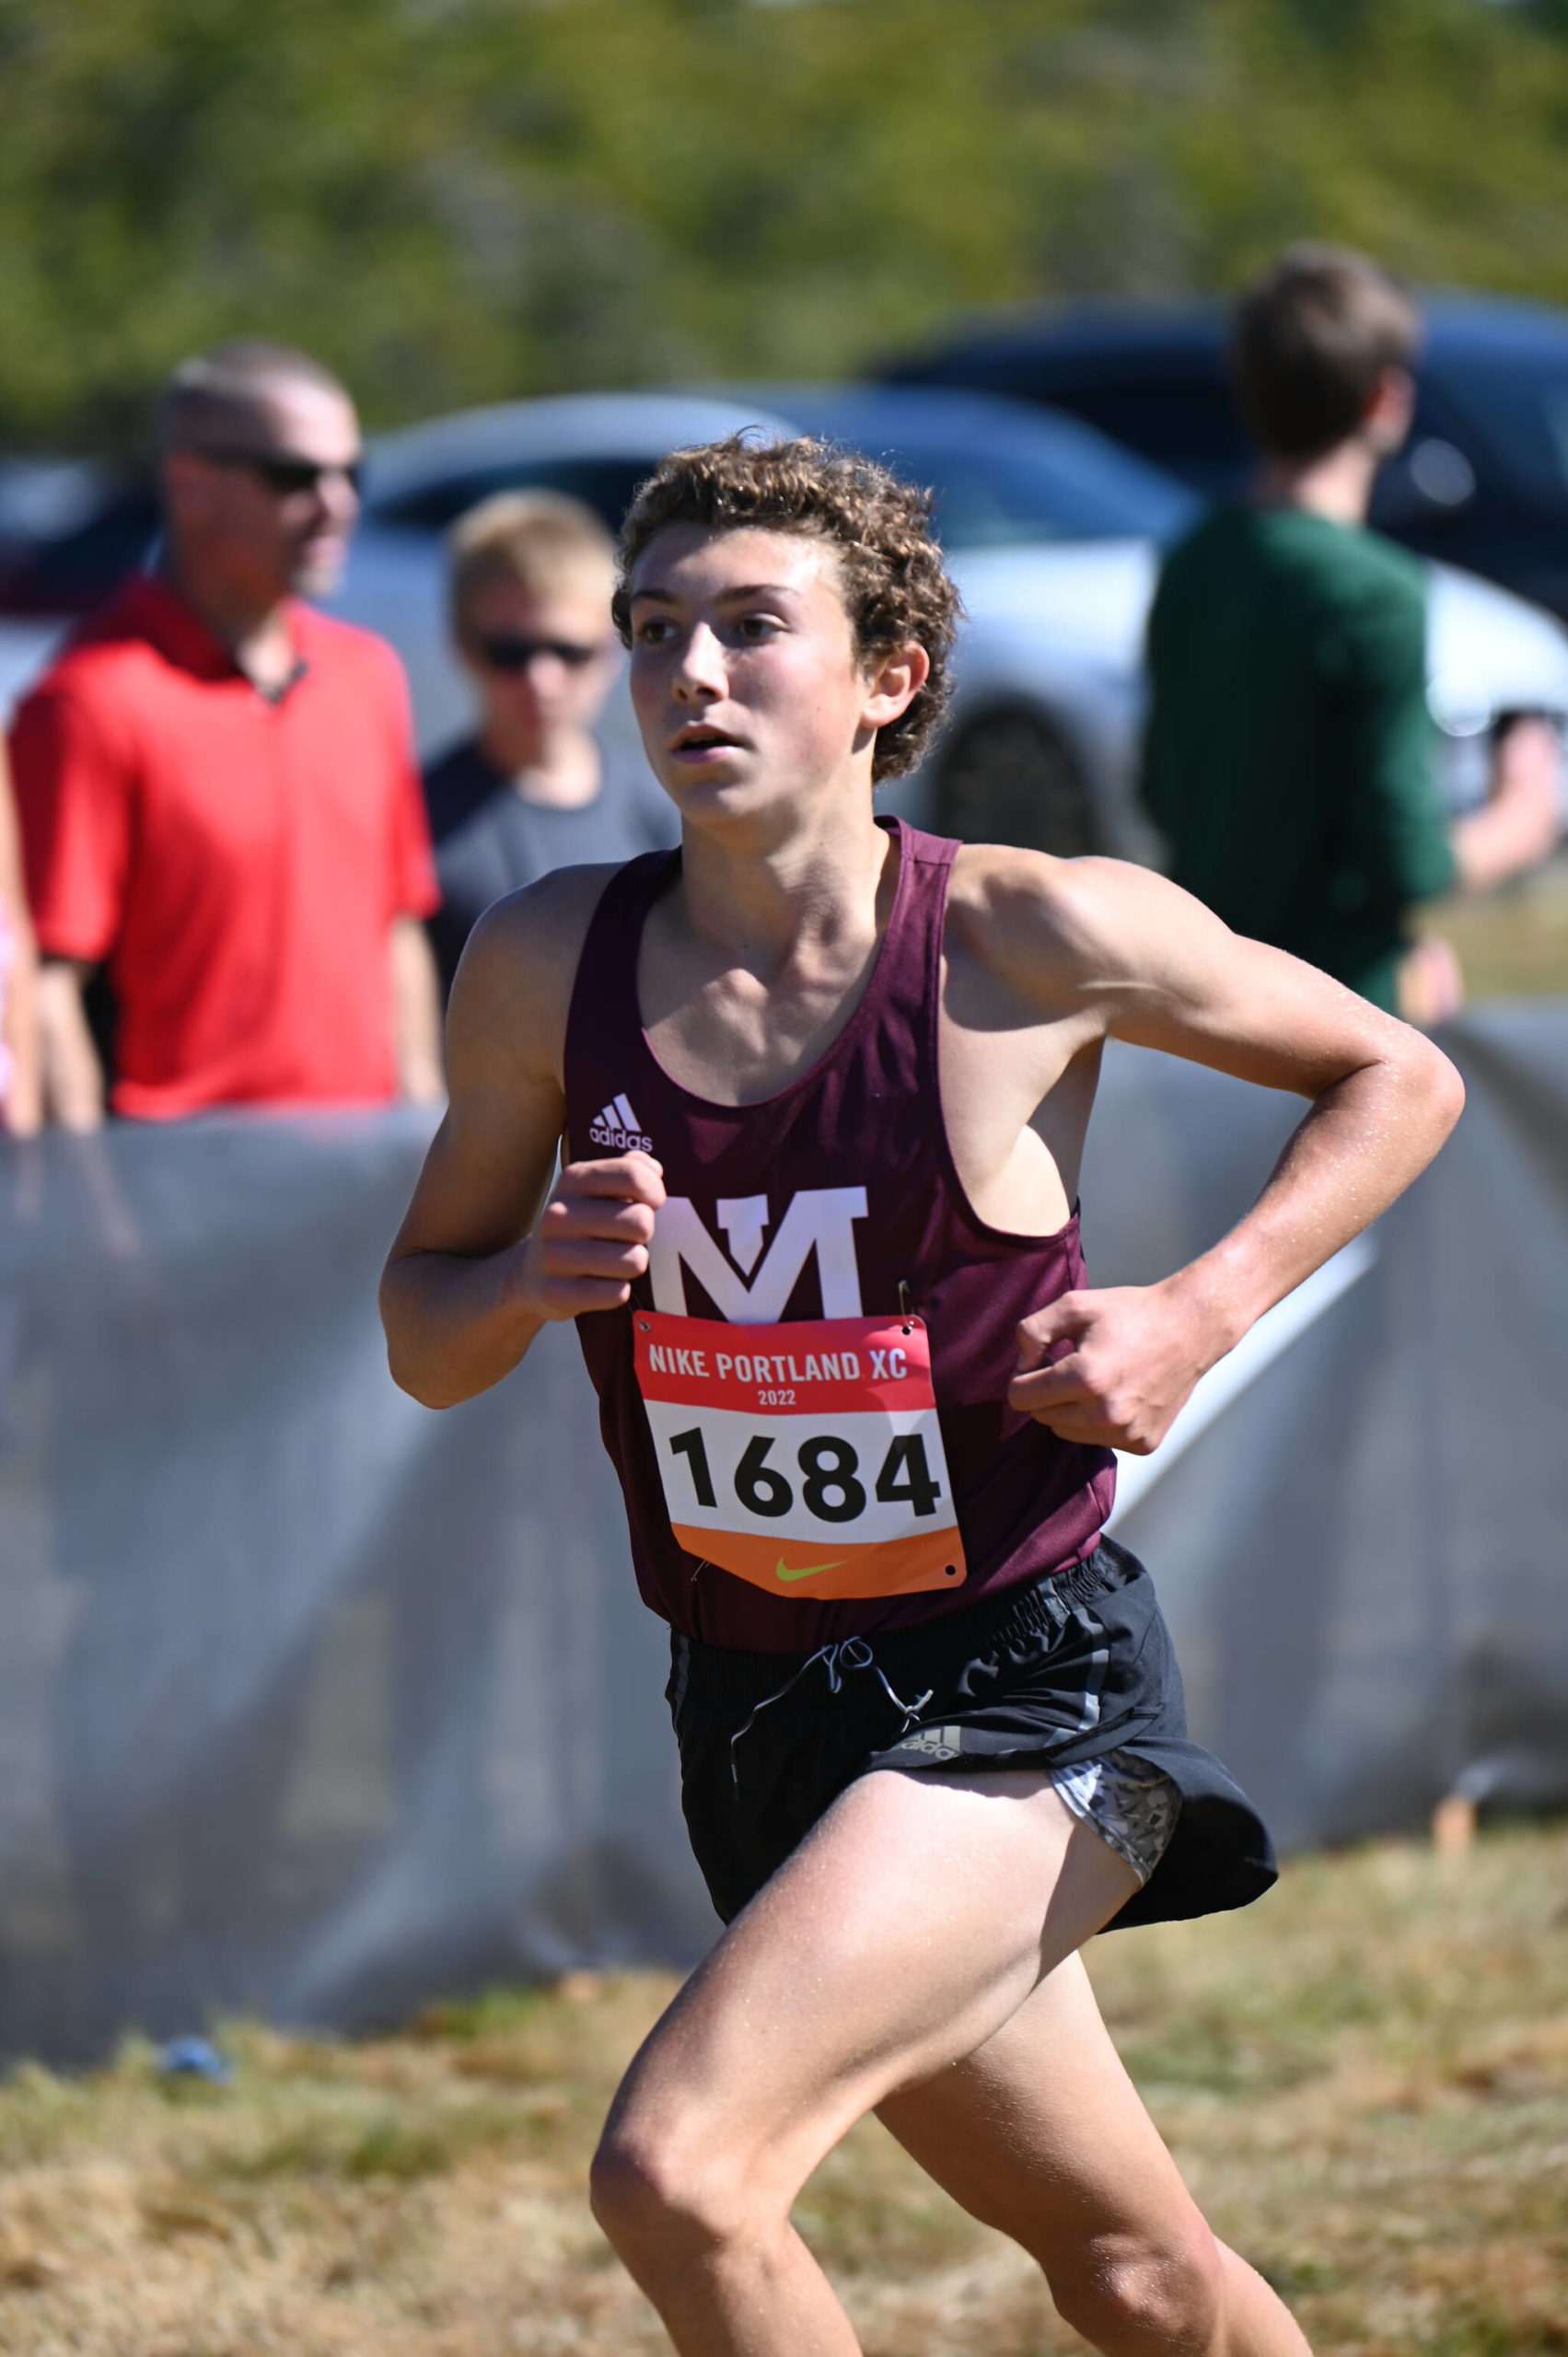 Mercer Island High School sophomore Owen Powell en route to setting a new school 5K record of 15:33.2 and winning the boys varsity Division 1 race at the recent Nike Portland XC 2022. Photo courtesy of Aaron Koopman.